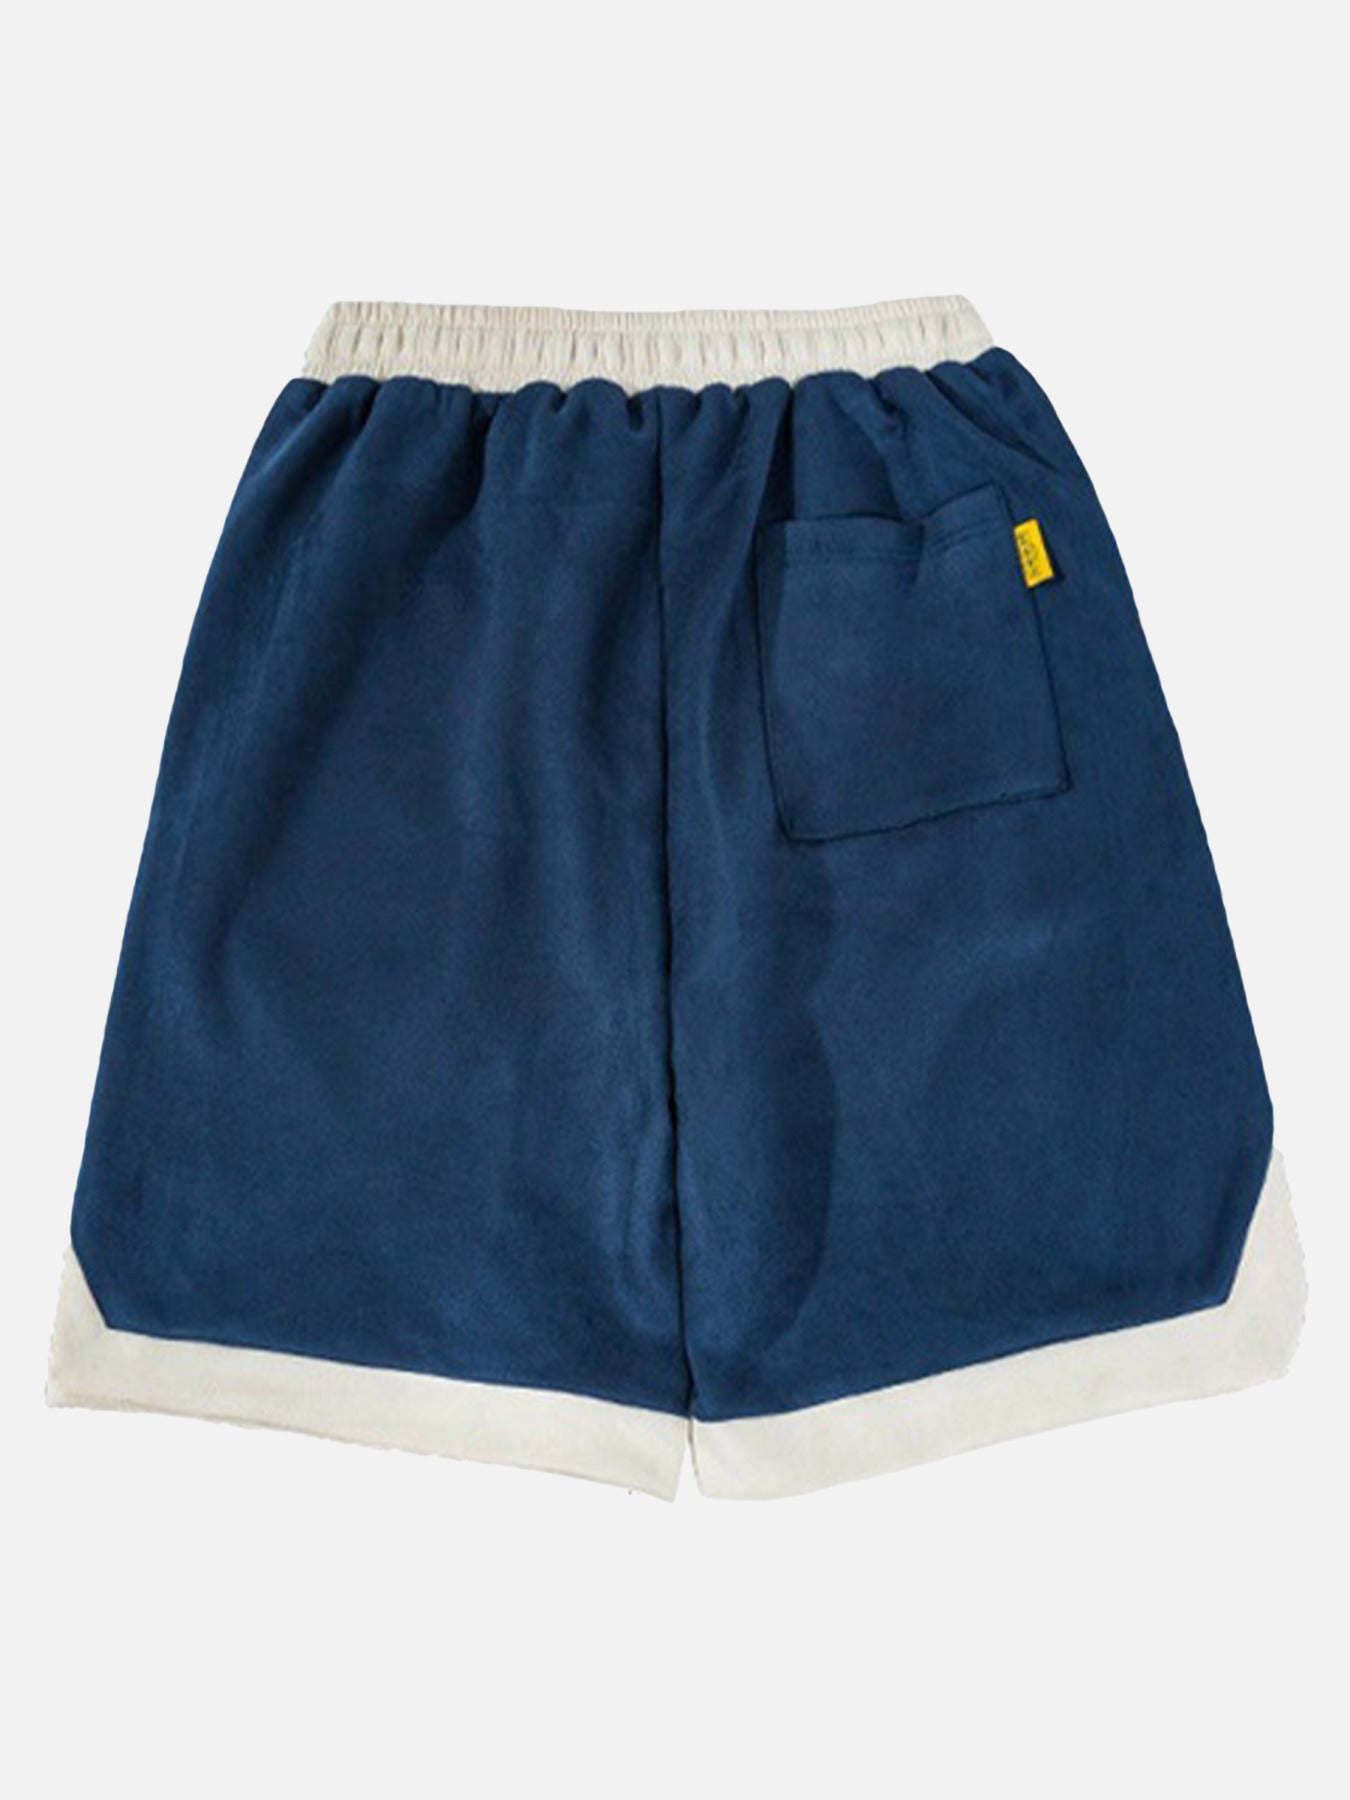 Sneakerland Suede Loose Fitting Shorts SP230524KFB3